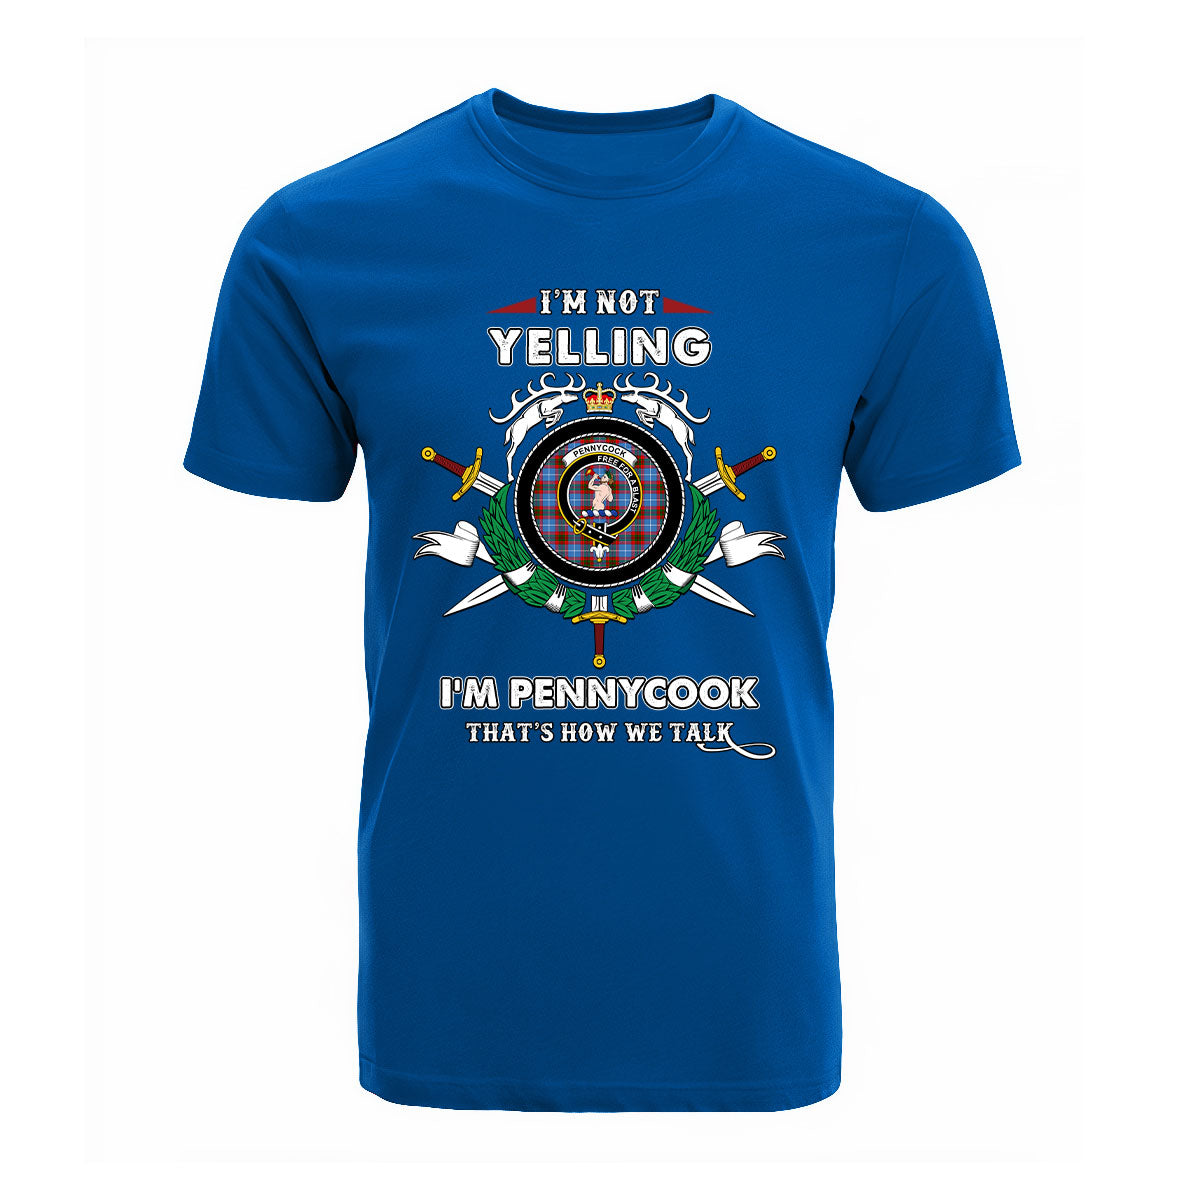 Pennycook Tartan Crest T-shirt - I'm not yelling style